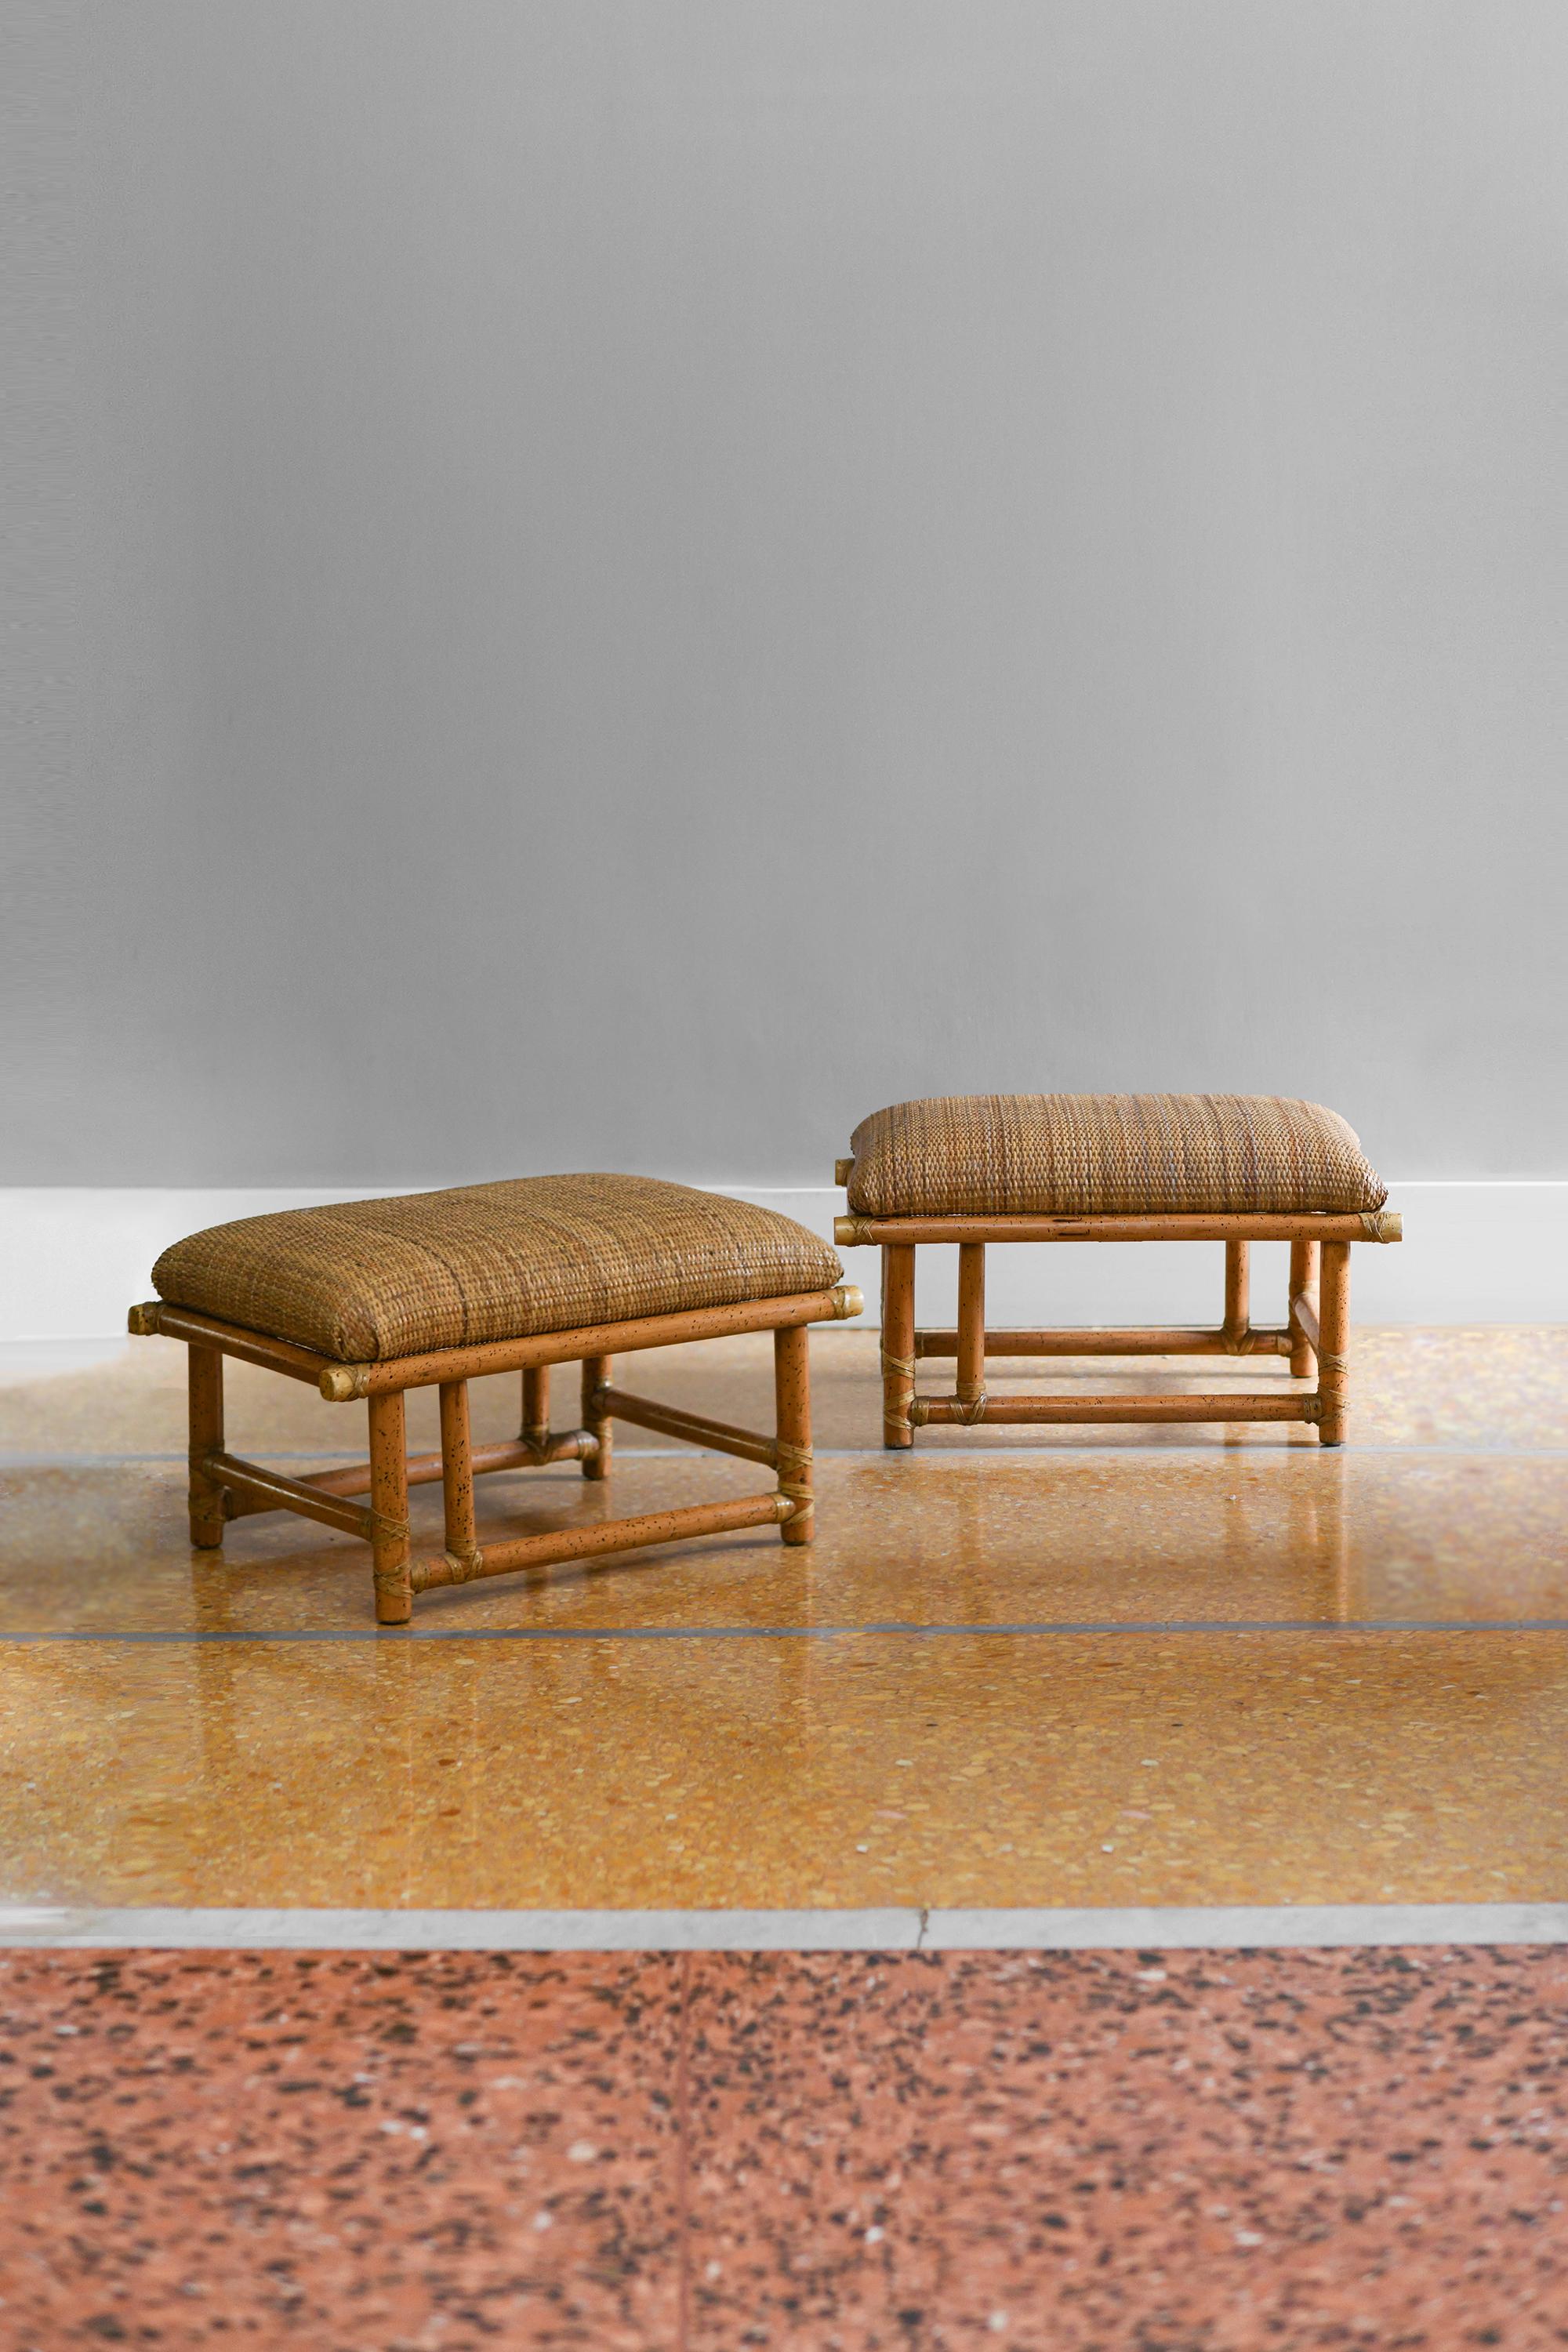 Pair of rattan and rush poufs with leather bindings, Prod. McGuire, San Francisco 1970
Product details
Dimensions: 65 W x 35 H x 43 D
Production: McGuire, San Francisco 1970
Sold as set of 2